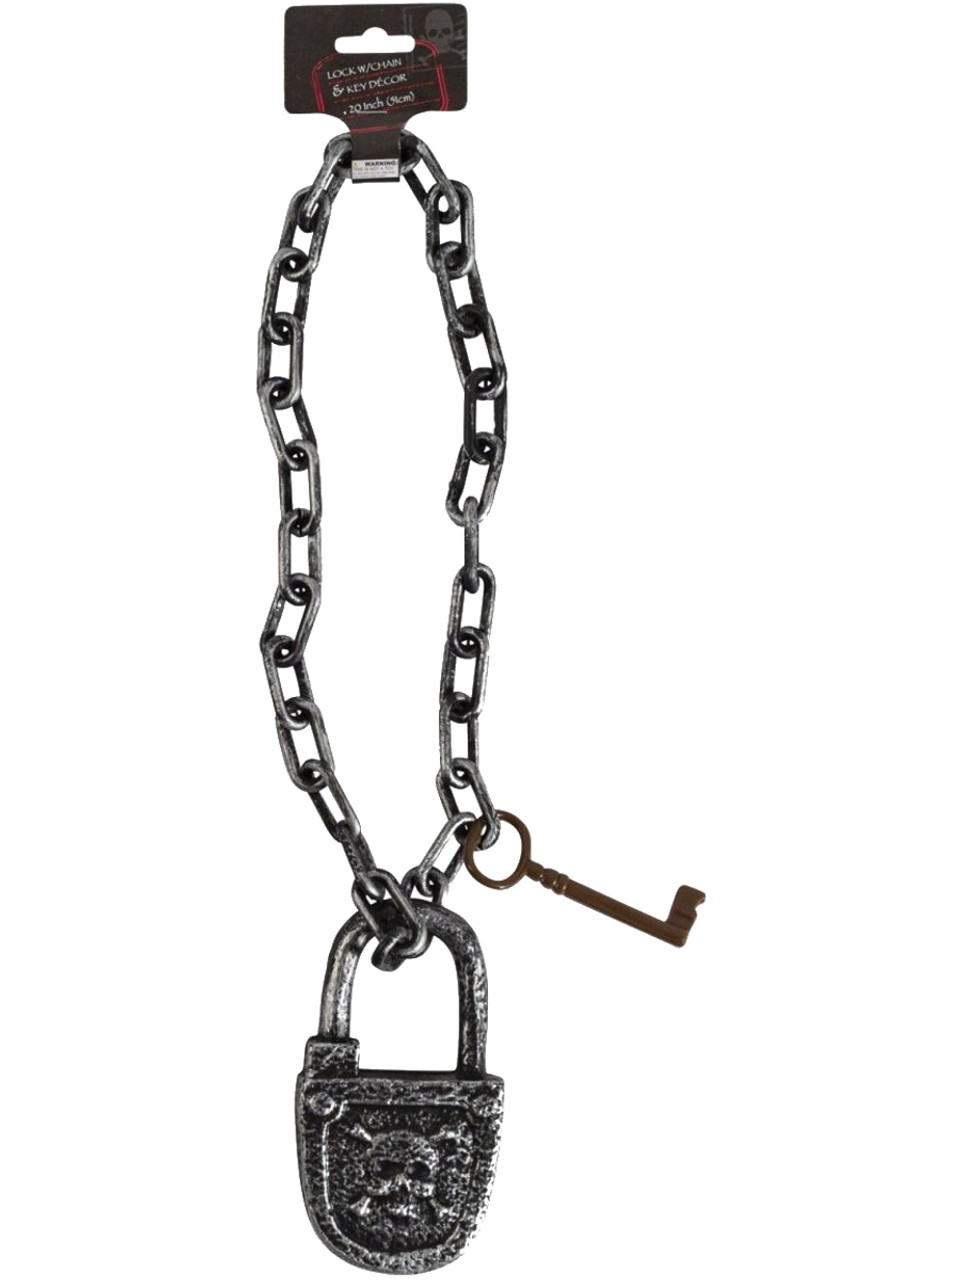 Regent Products Silver Pirate Prisoner Chains with Lock and Key